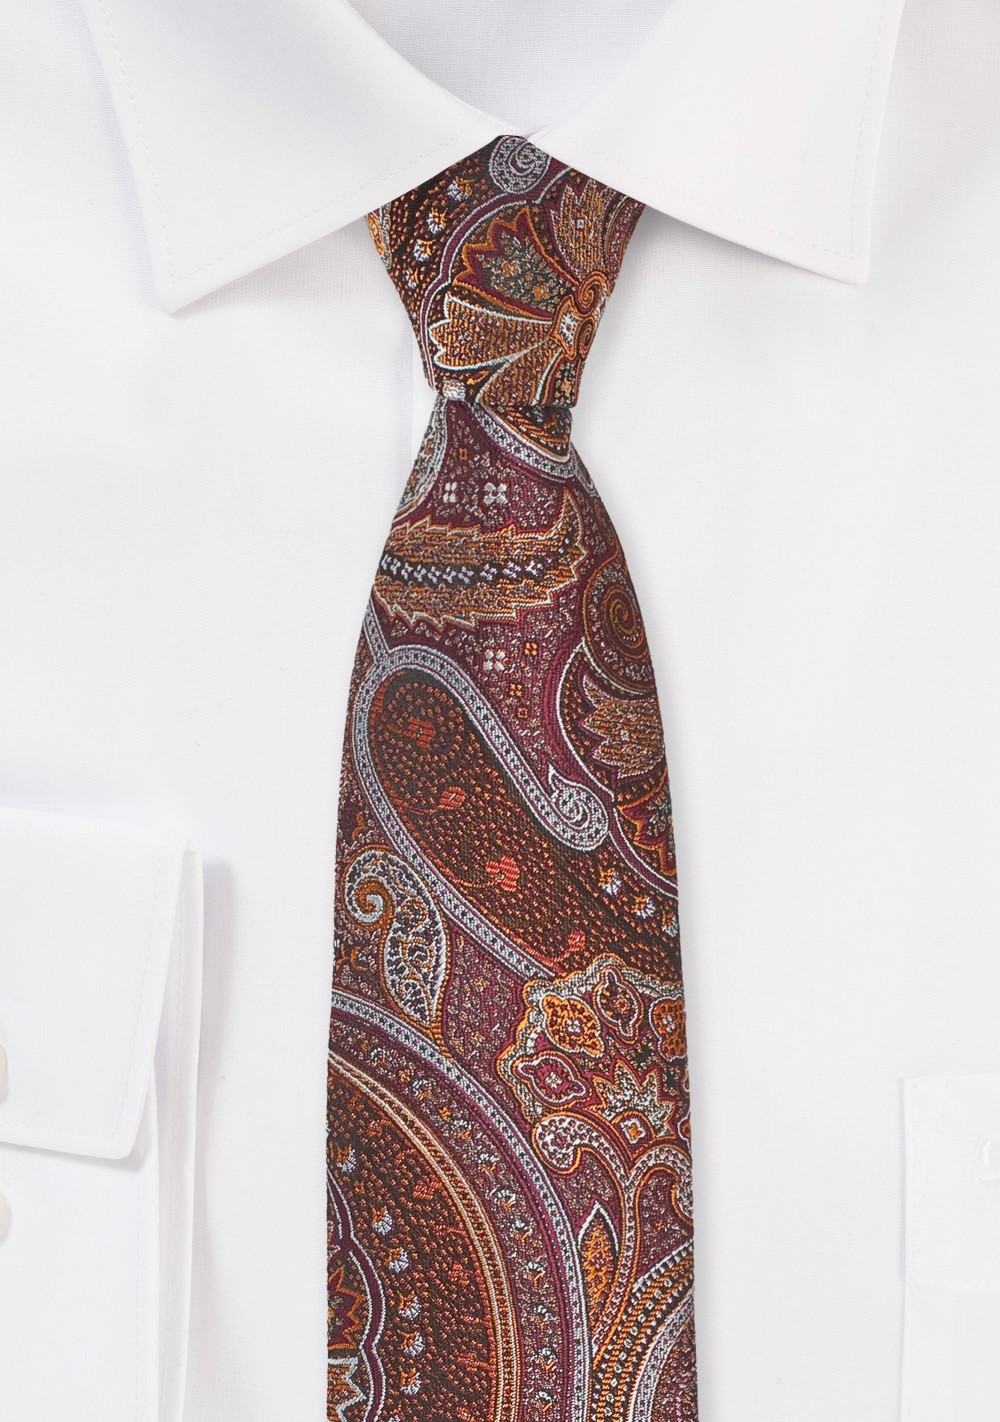 Skinny Paisley Tie in Copper and Brown